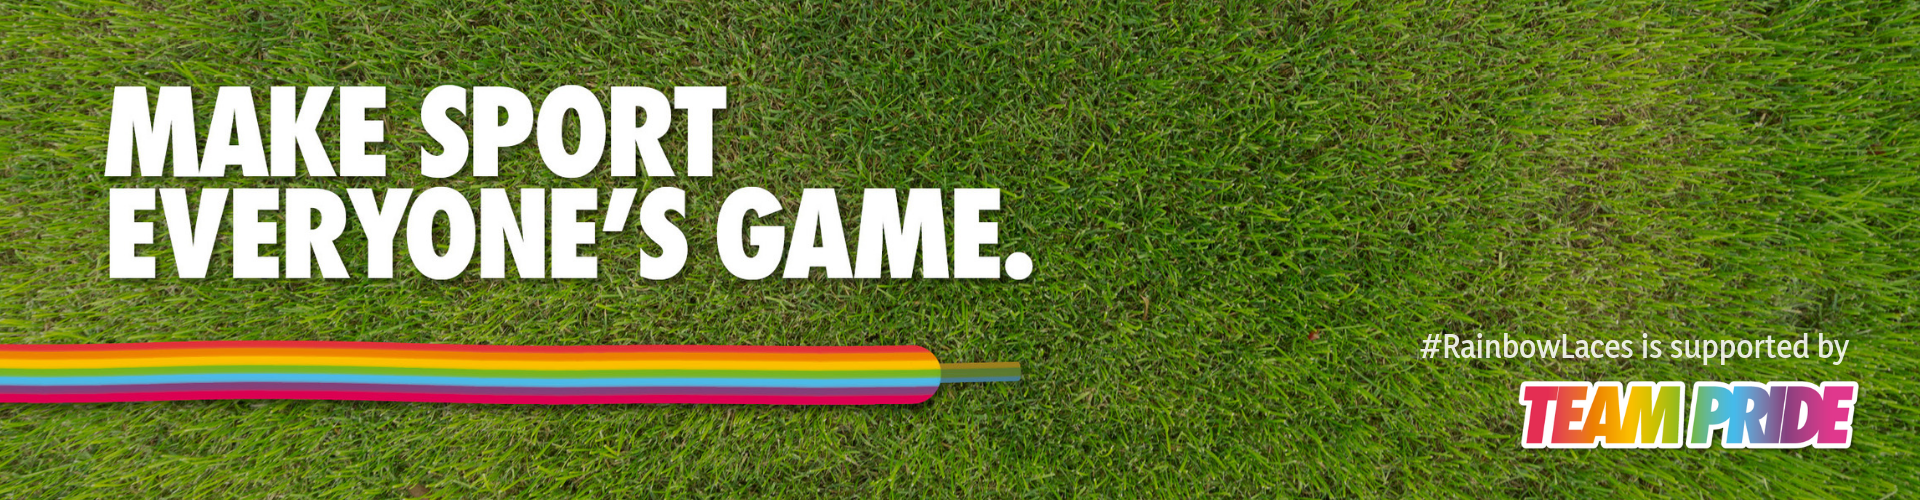 Rainbow Laces banner